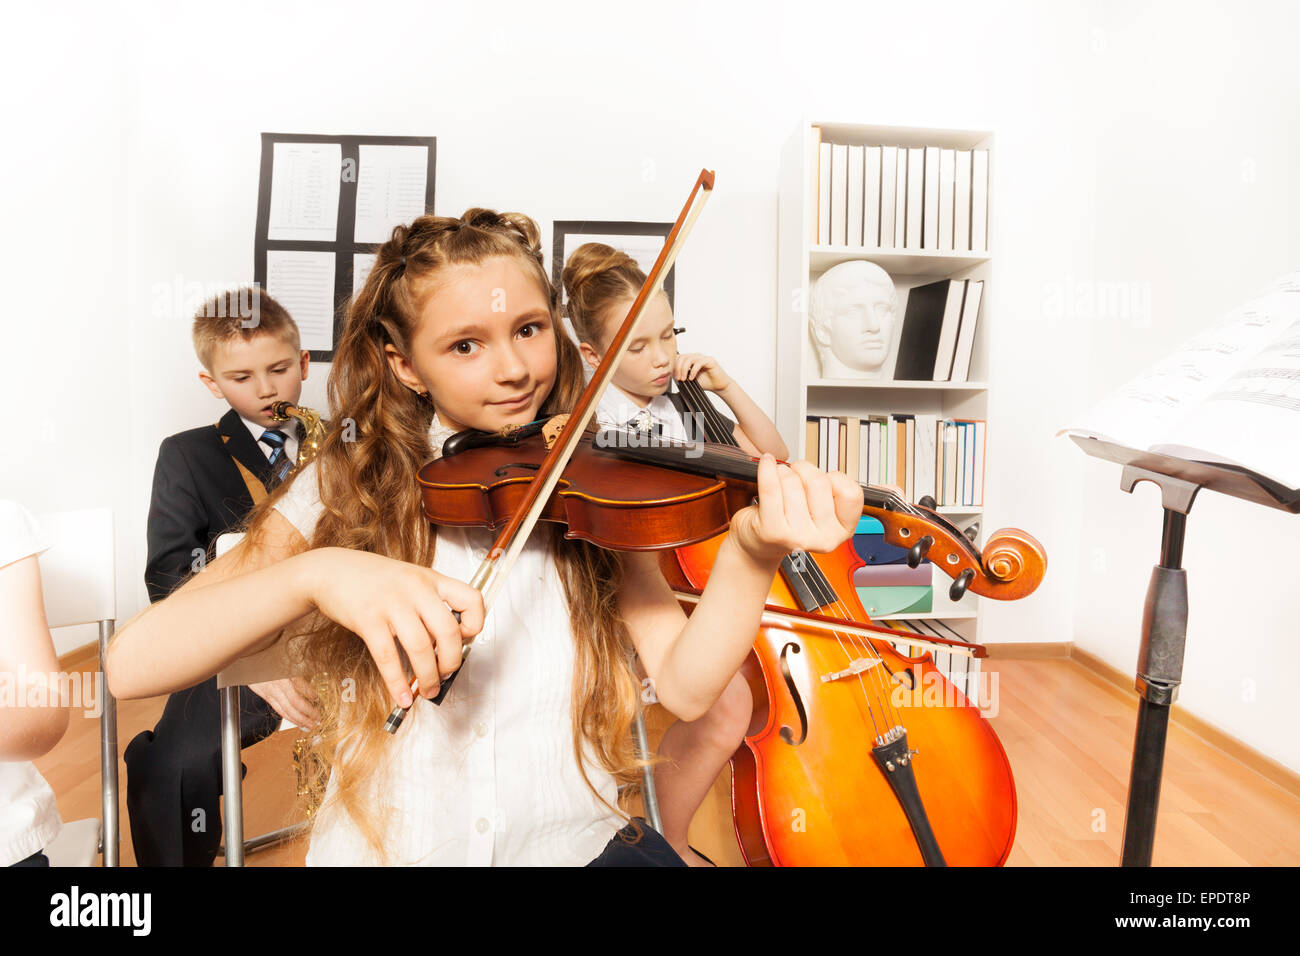 Performance Of Kids Playing Musical Instruments Stock Photo 82668342